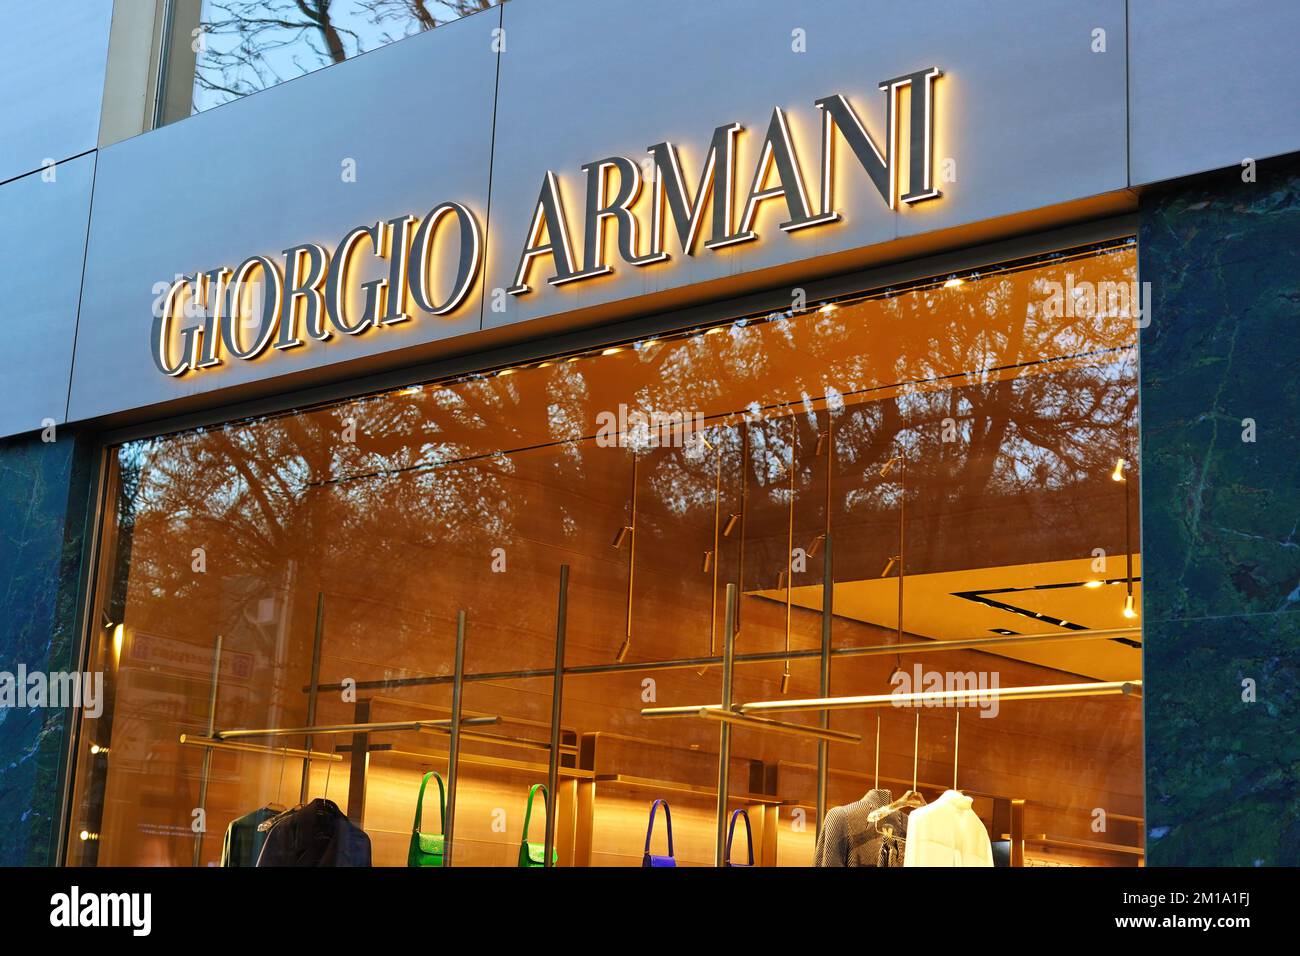 Giorgio Armani Luxury Clothing Store at Night in Hamburg, Germany Editorial  Stock Image - Image of design, front: 199963634